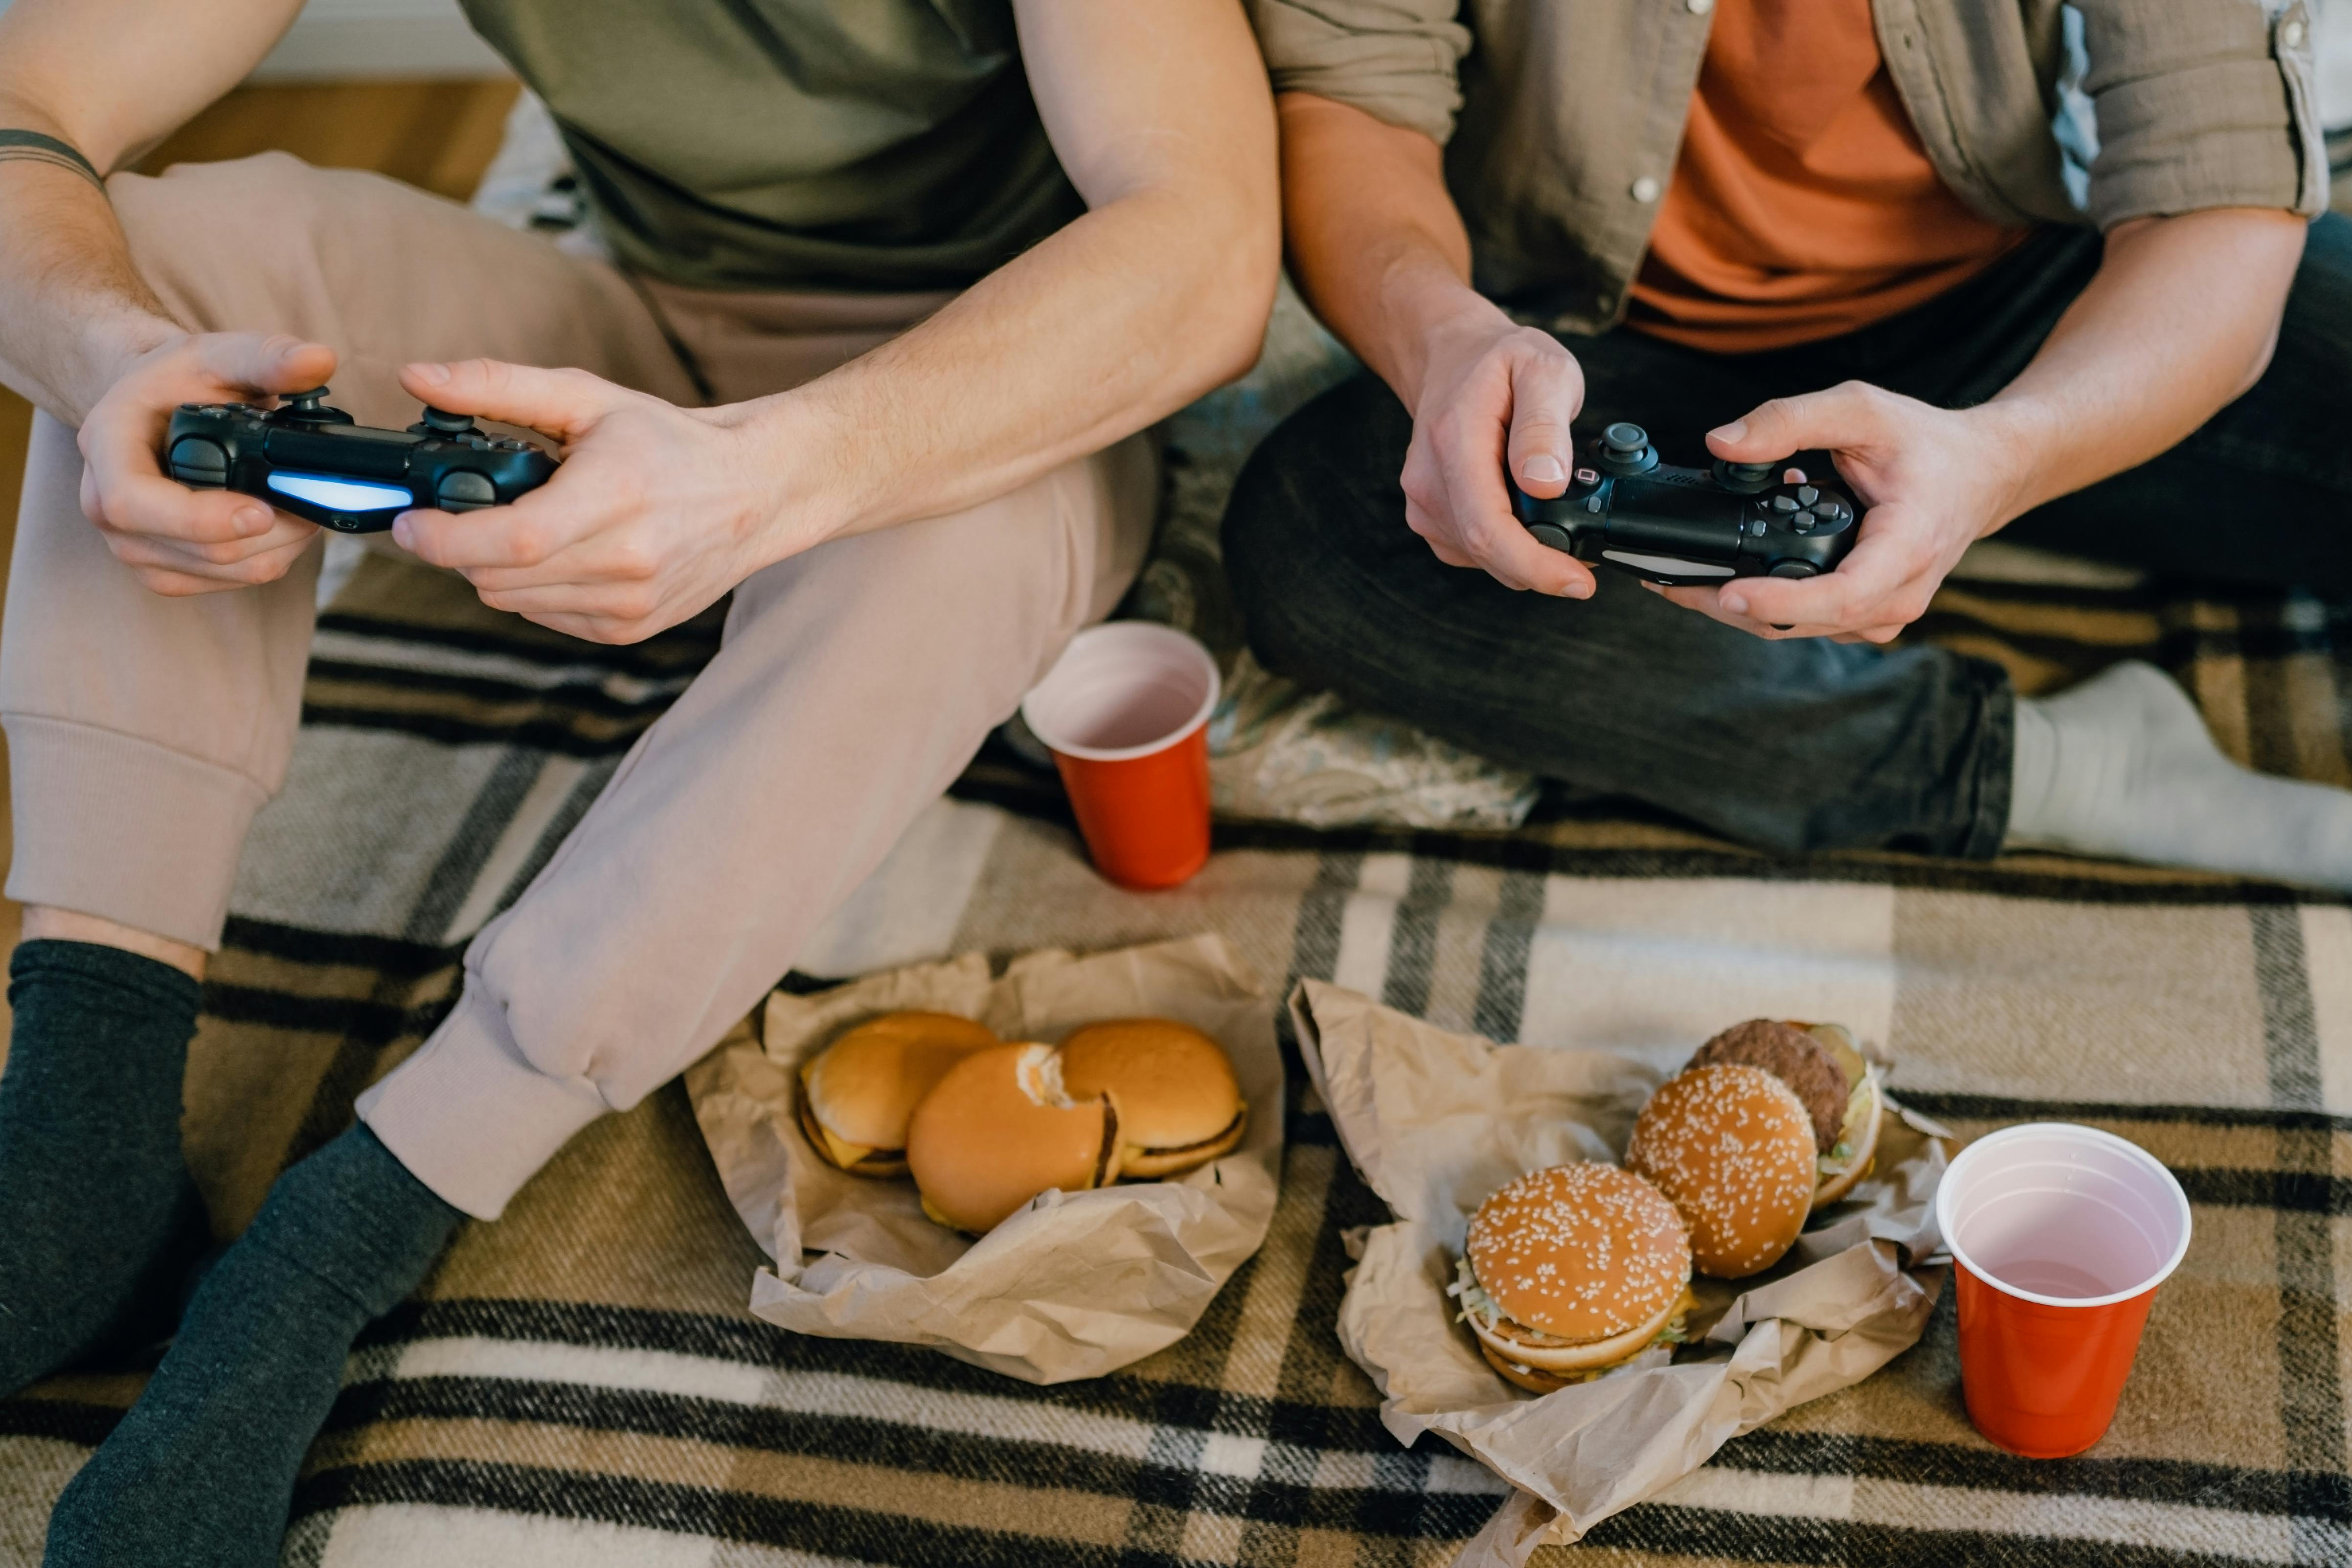 Two men sitting on the floor eating burgers while playing video games | Source: Pexels